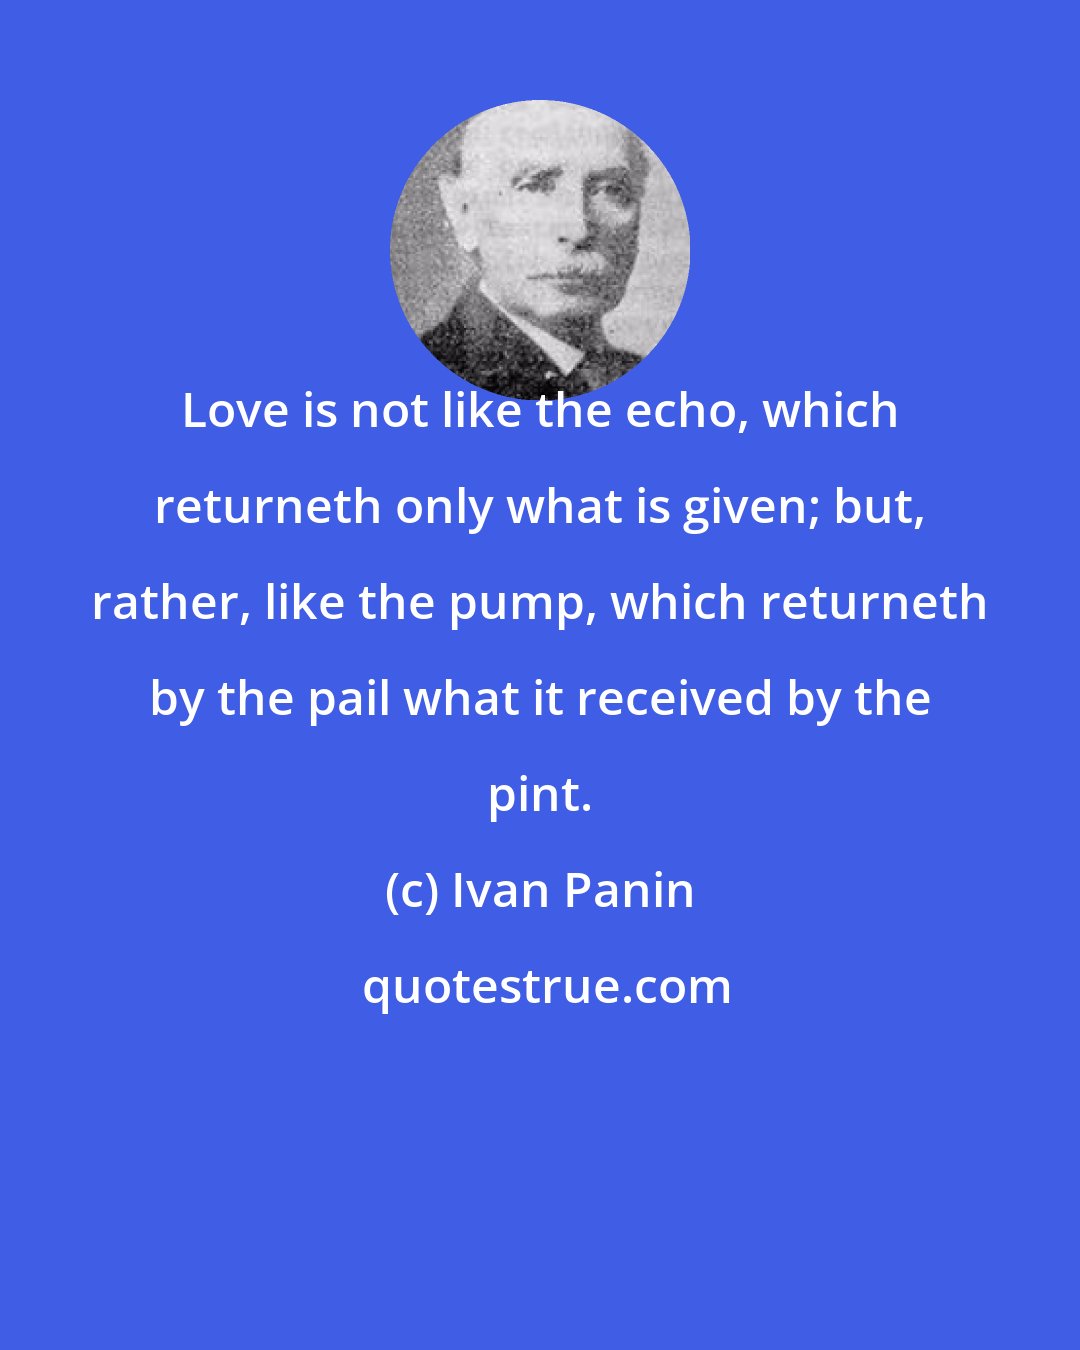 Ivan Panin: Love is not like the echo, which returneth only what is given; but, rather, like the pump, which returneth by the pail what it received by the pint.